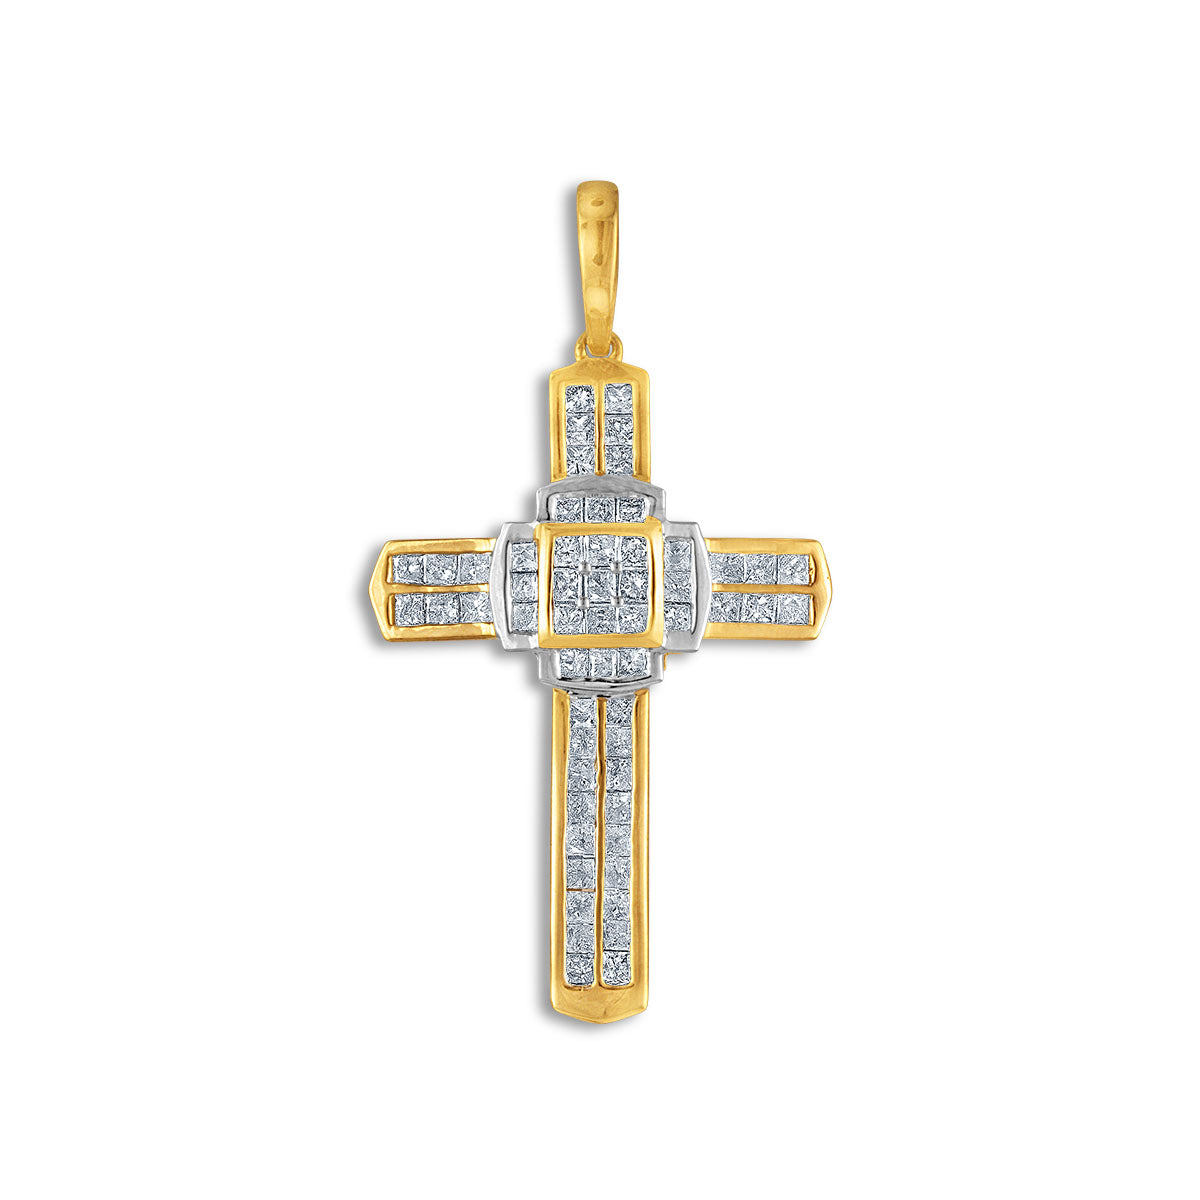 10KT White and Yellow Gold 1-1/2 CTW Diamond 43X23MM Cross Pendant. Chain Not Included